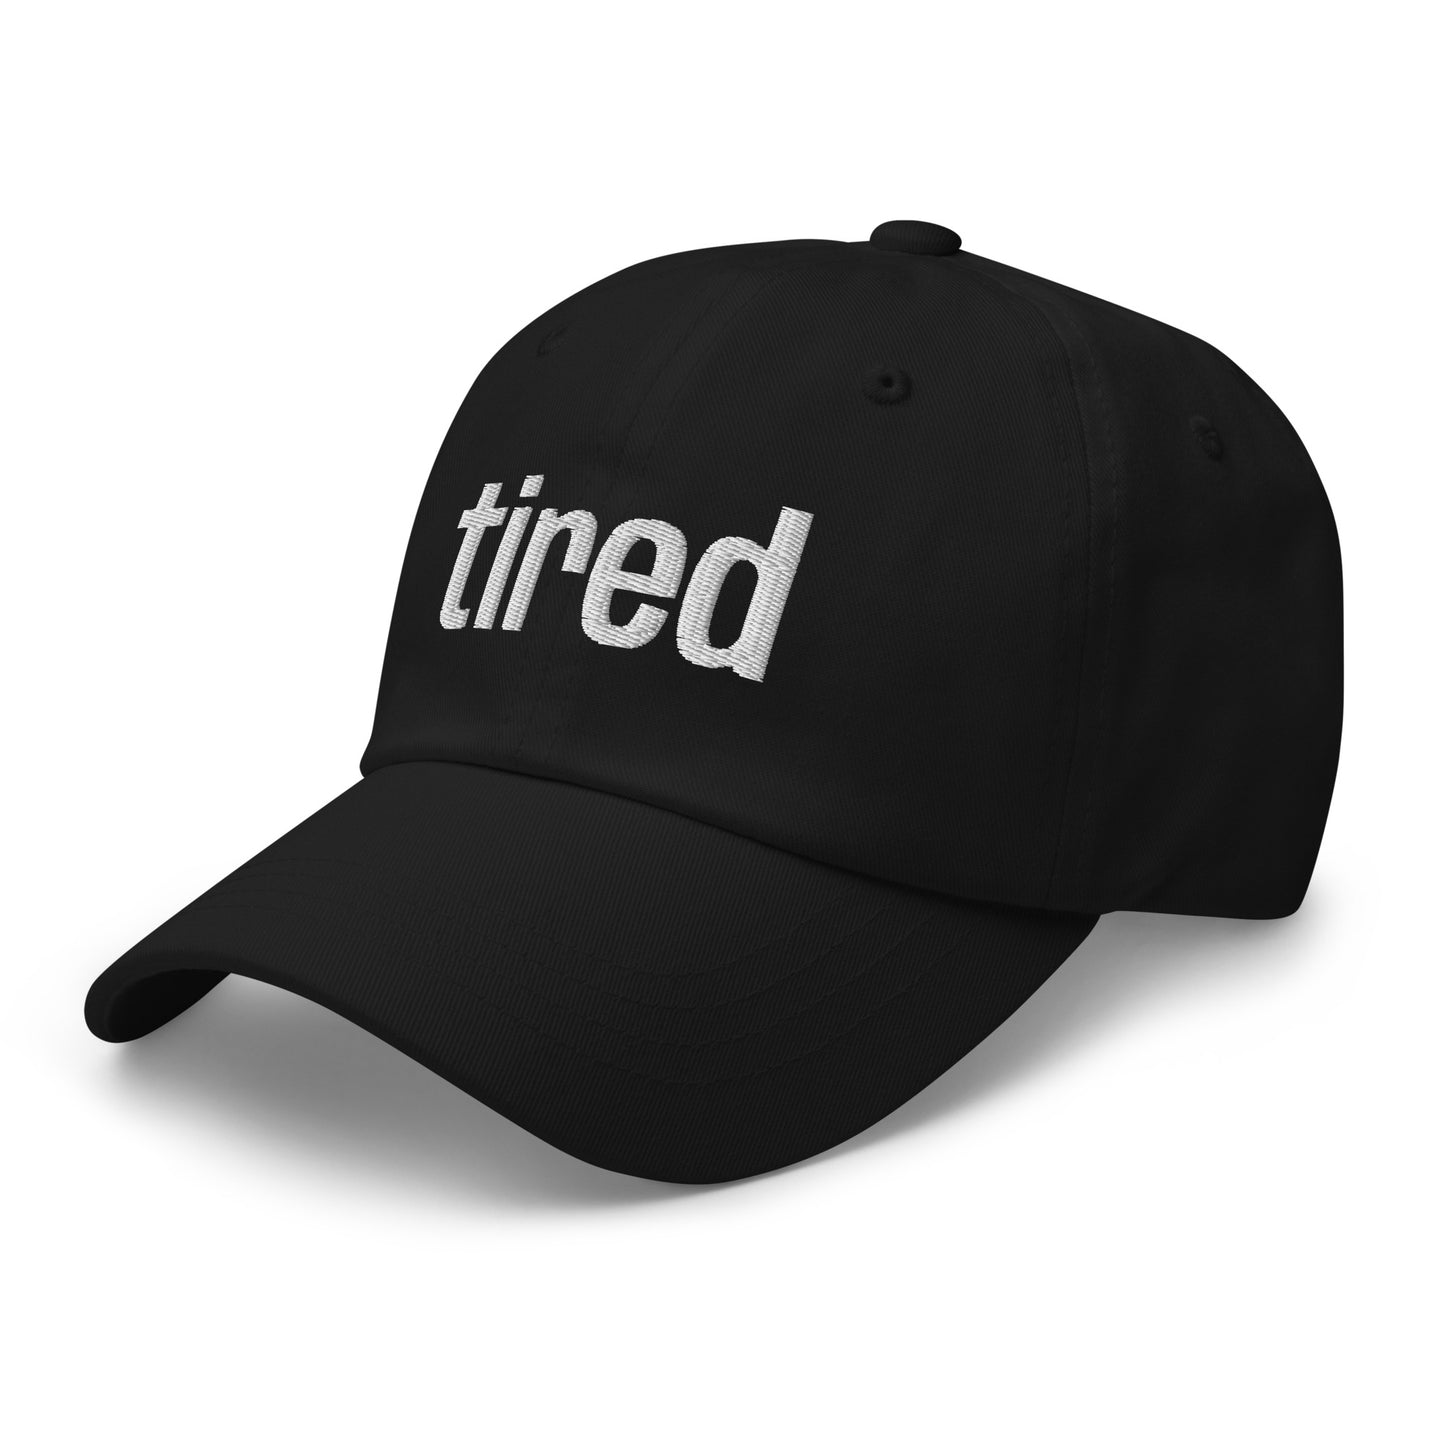 Tired Hat